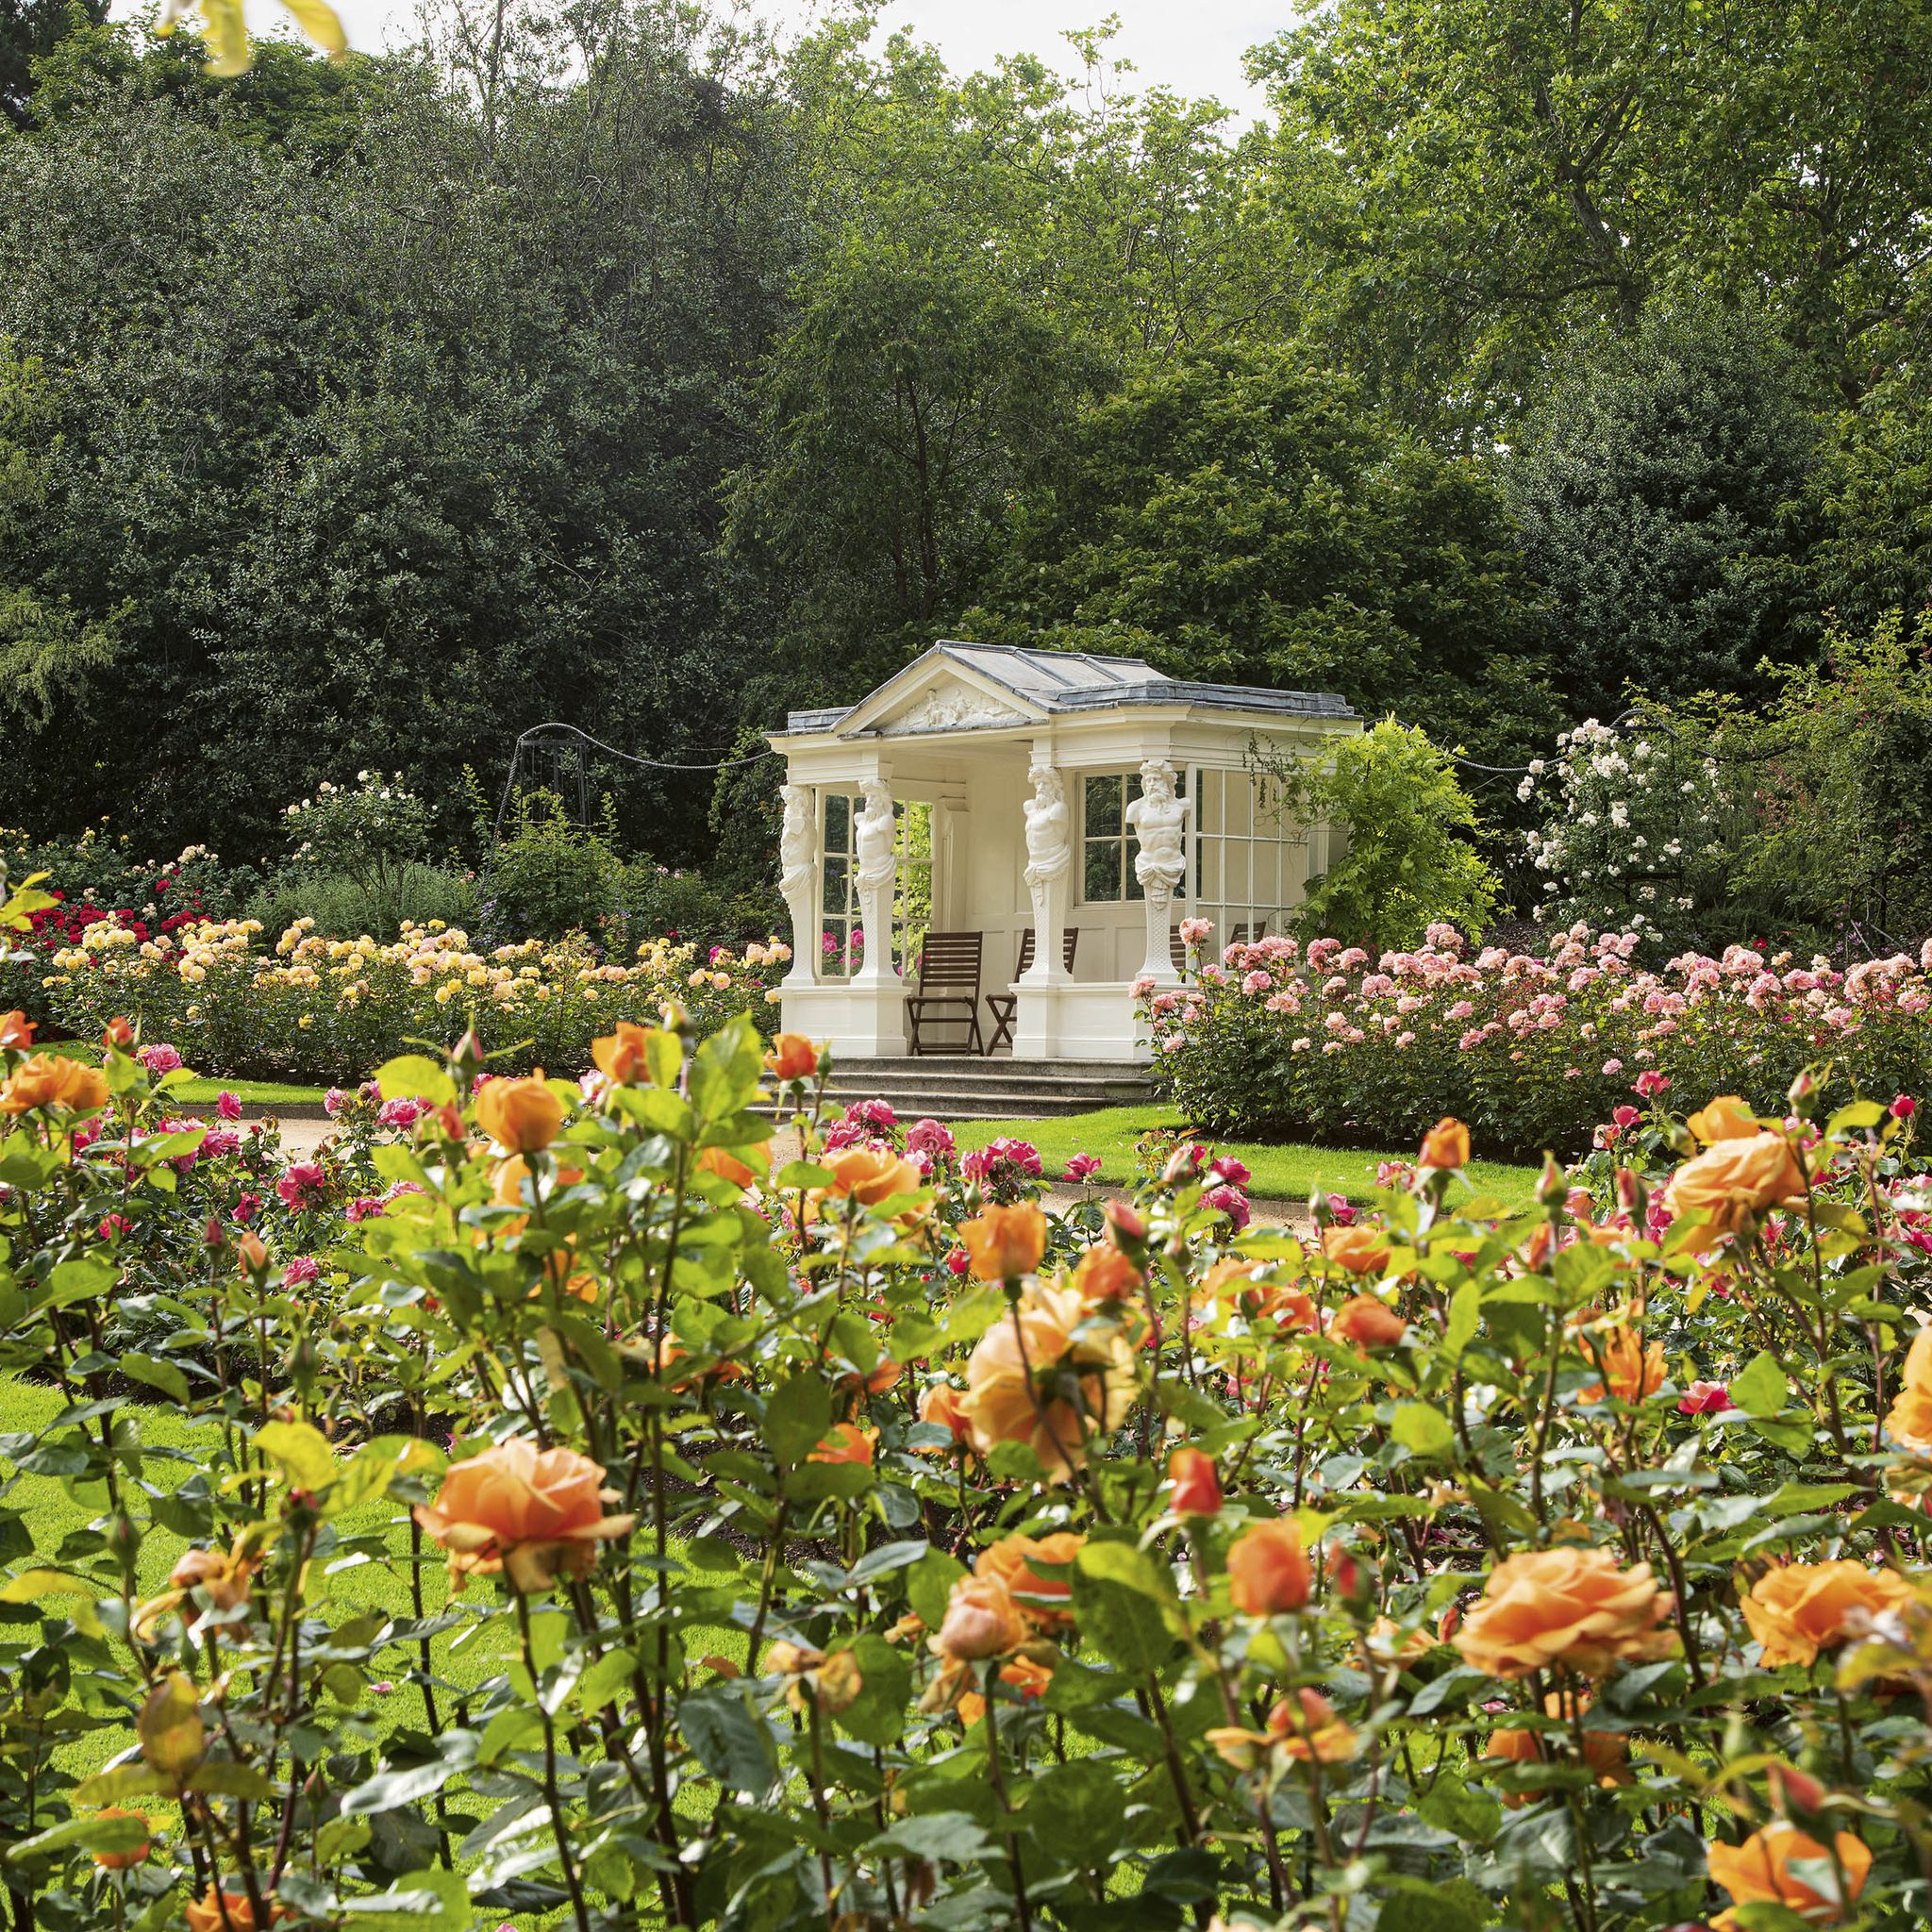 buckingham palace gardens revealed in a new book